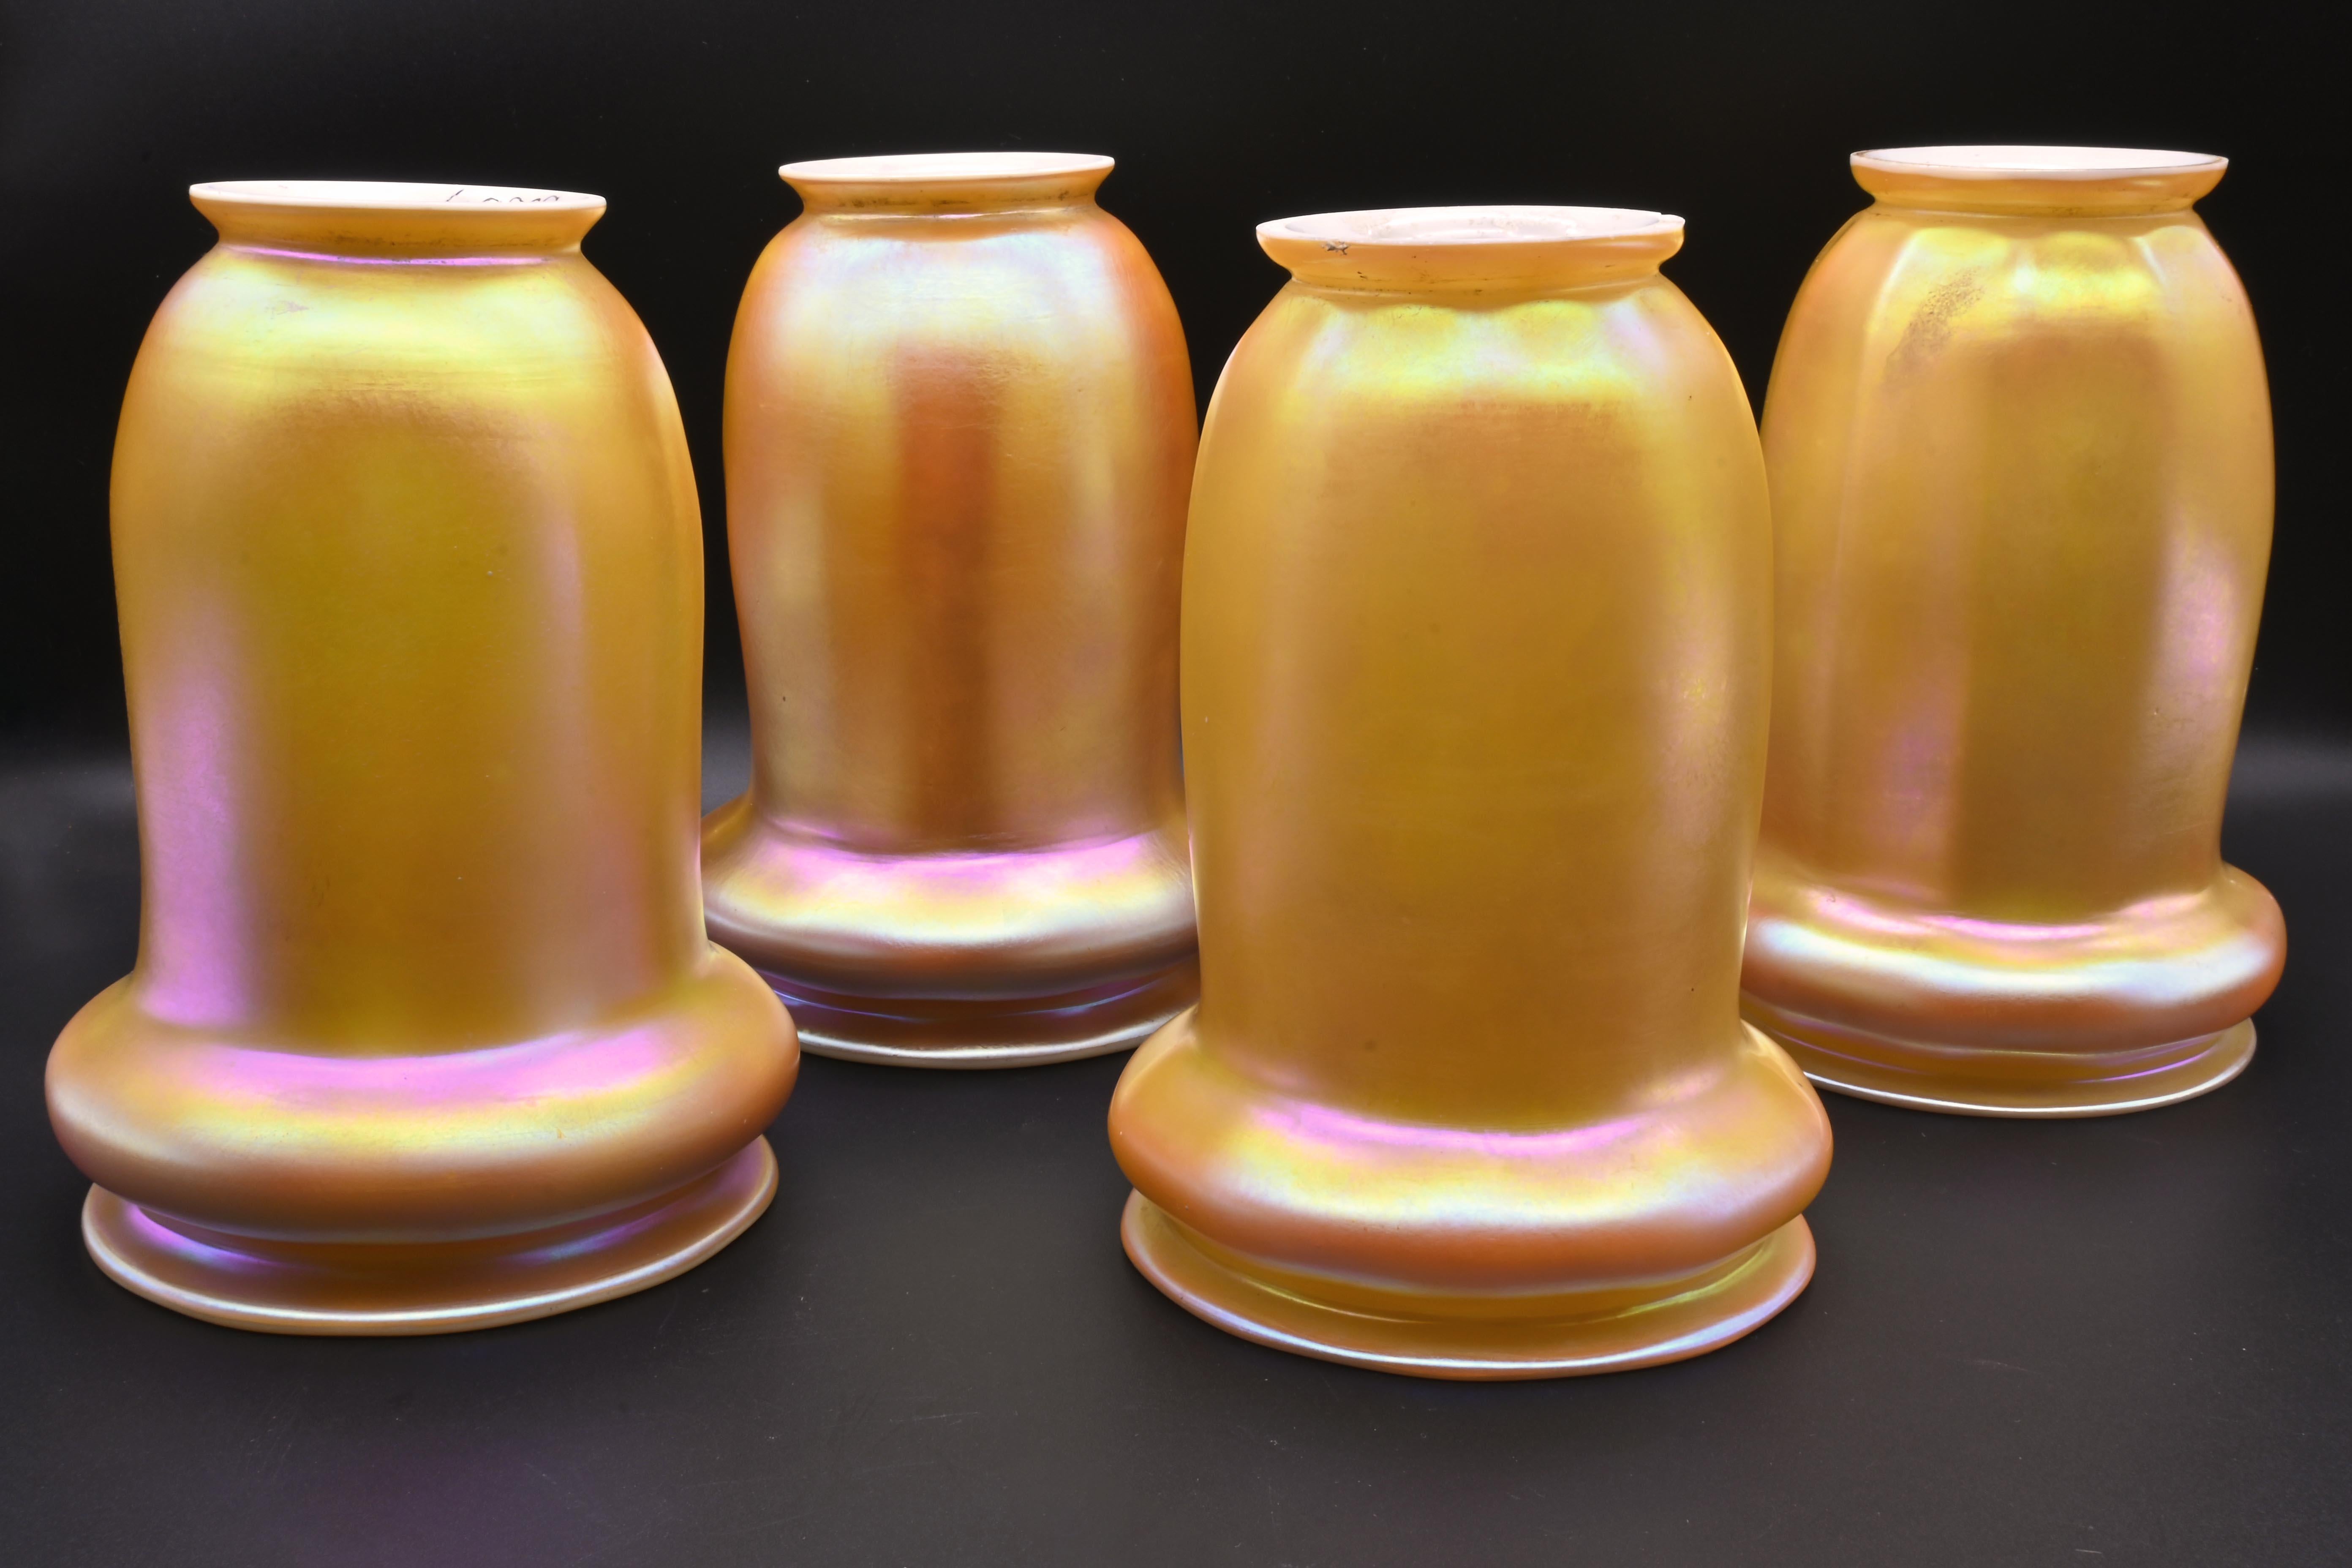 Seldom Seen Steuben Golden Arene & Calcite American Art glass shades

Four available
Sold individually

AA# S60028
Amazing Aurene outside with Calcite inside, giving the shades a subtle yellow/orange glow. The curve in the bottom part of the